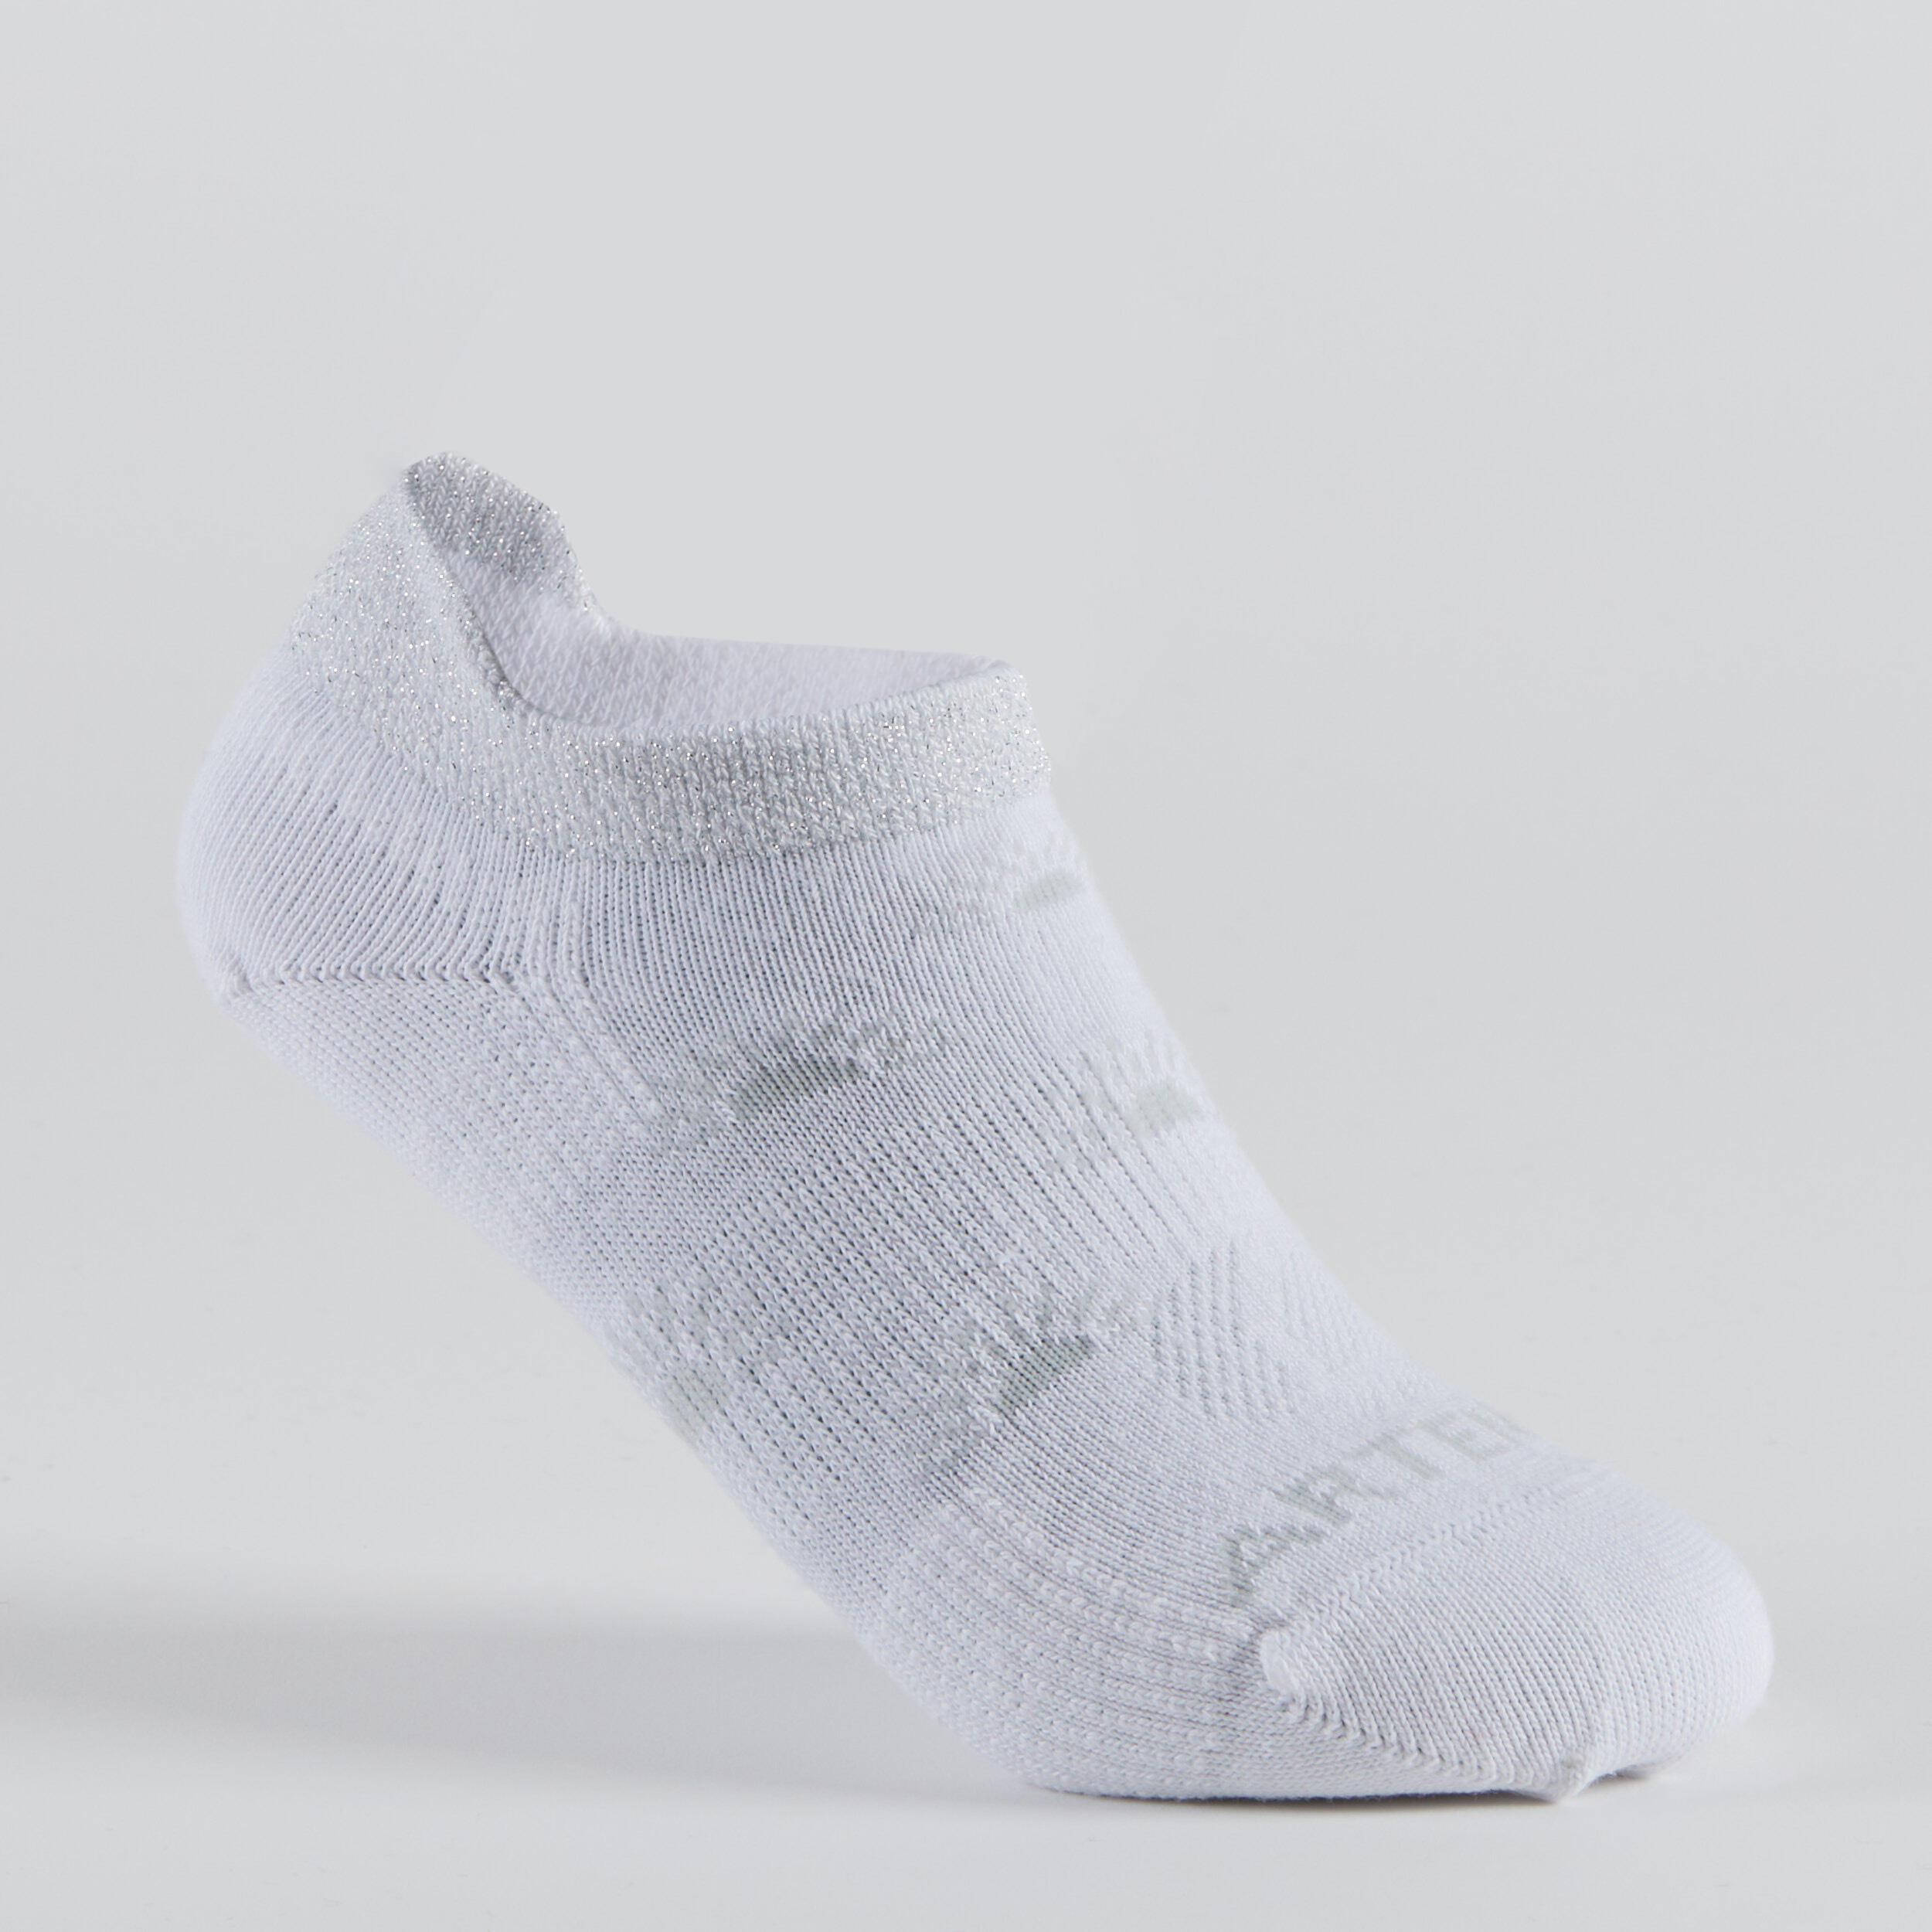 Kids' Low Tennis Socks Tri-Pack RS 160 - White with Patterns 4/14